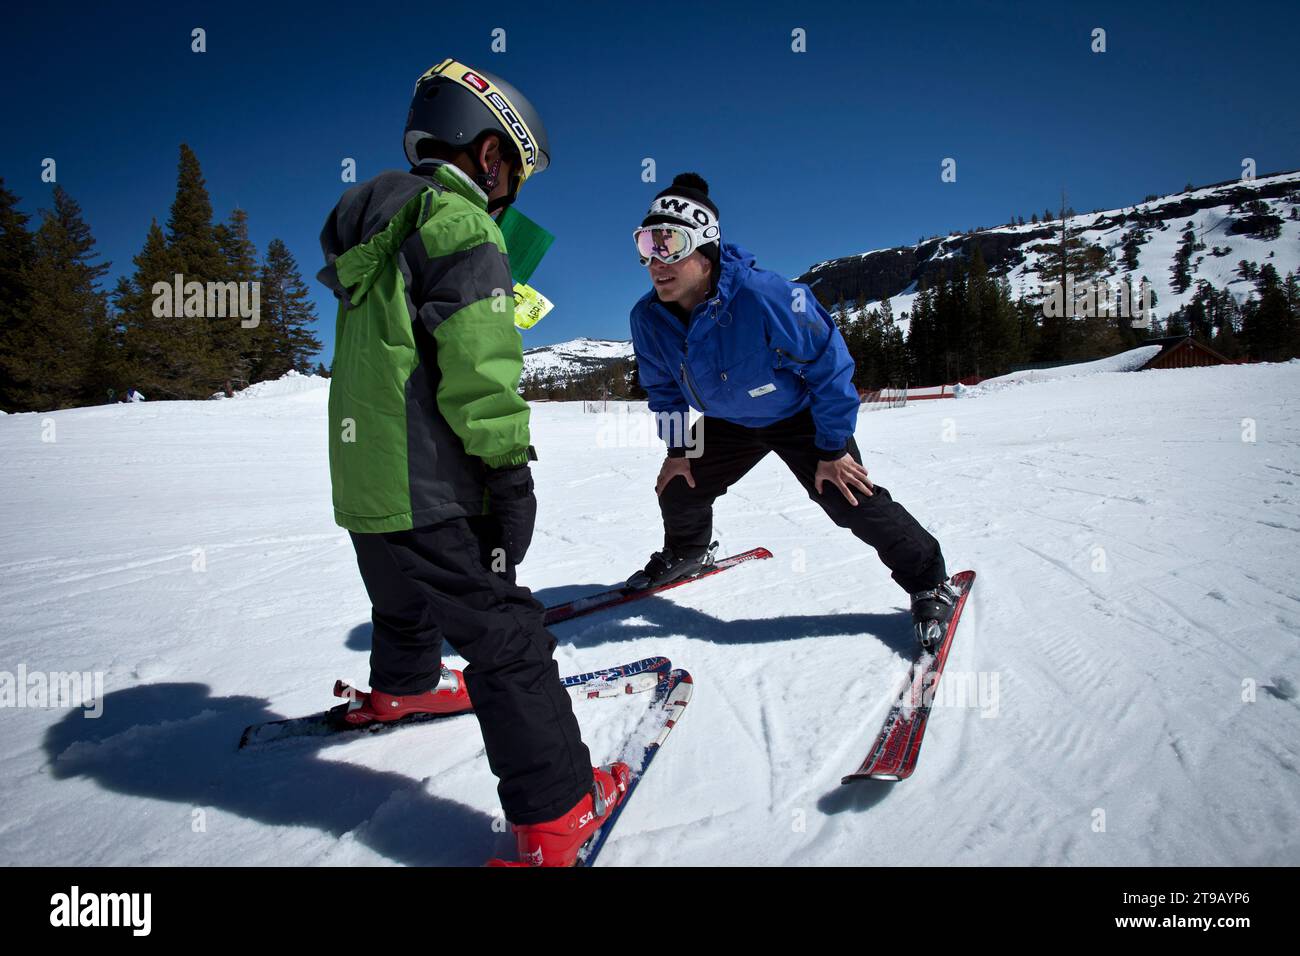 Ski Instructor helping a young skier on a bunny slope. Stock Photo